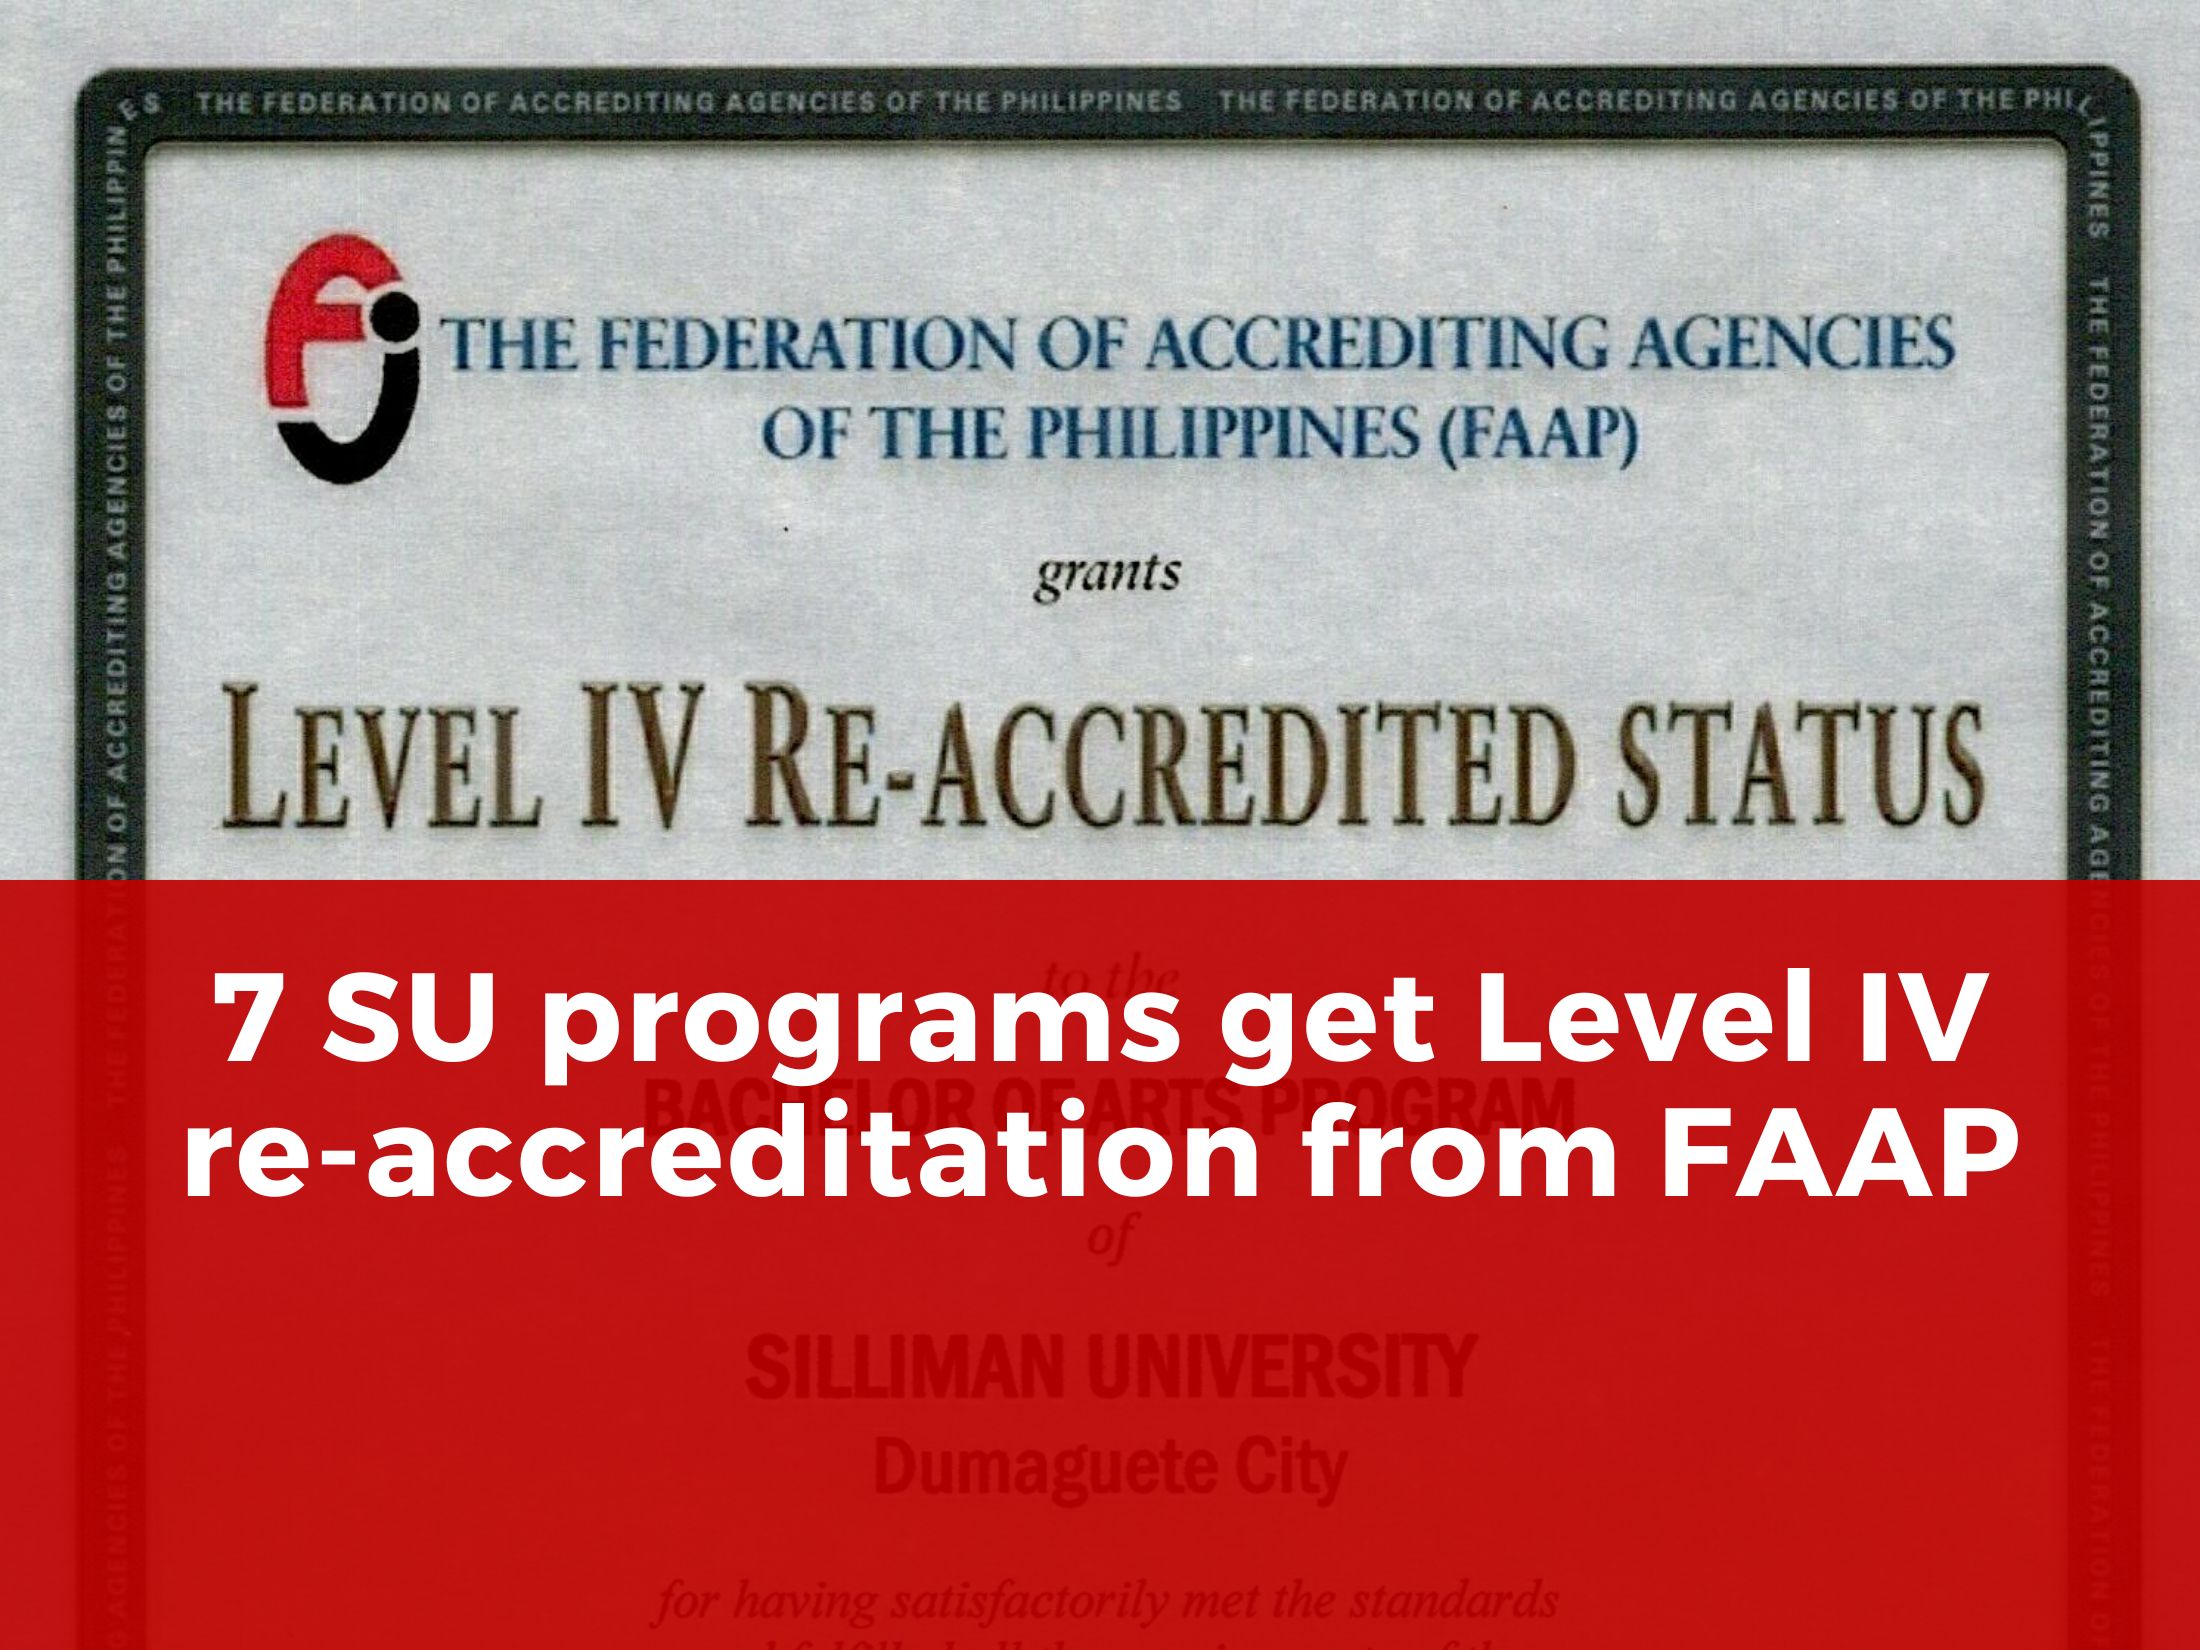 7 SU programs get Level IV re-accreditation from FAAP